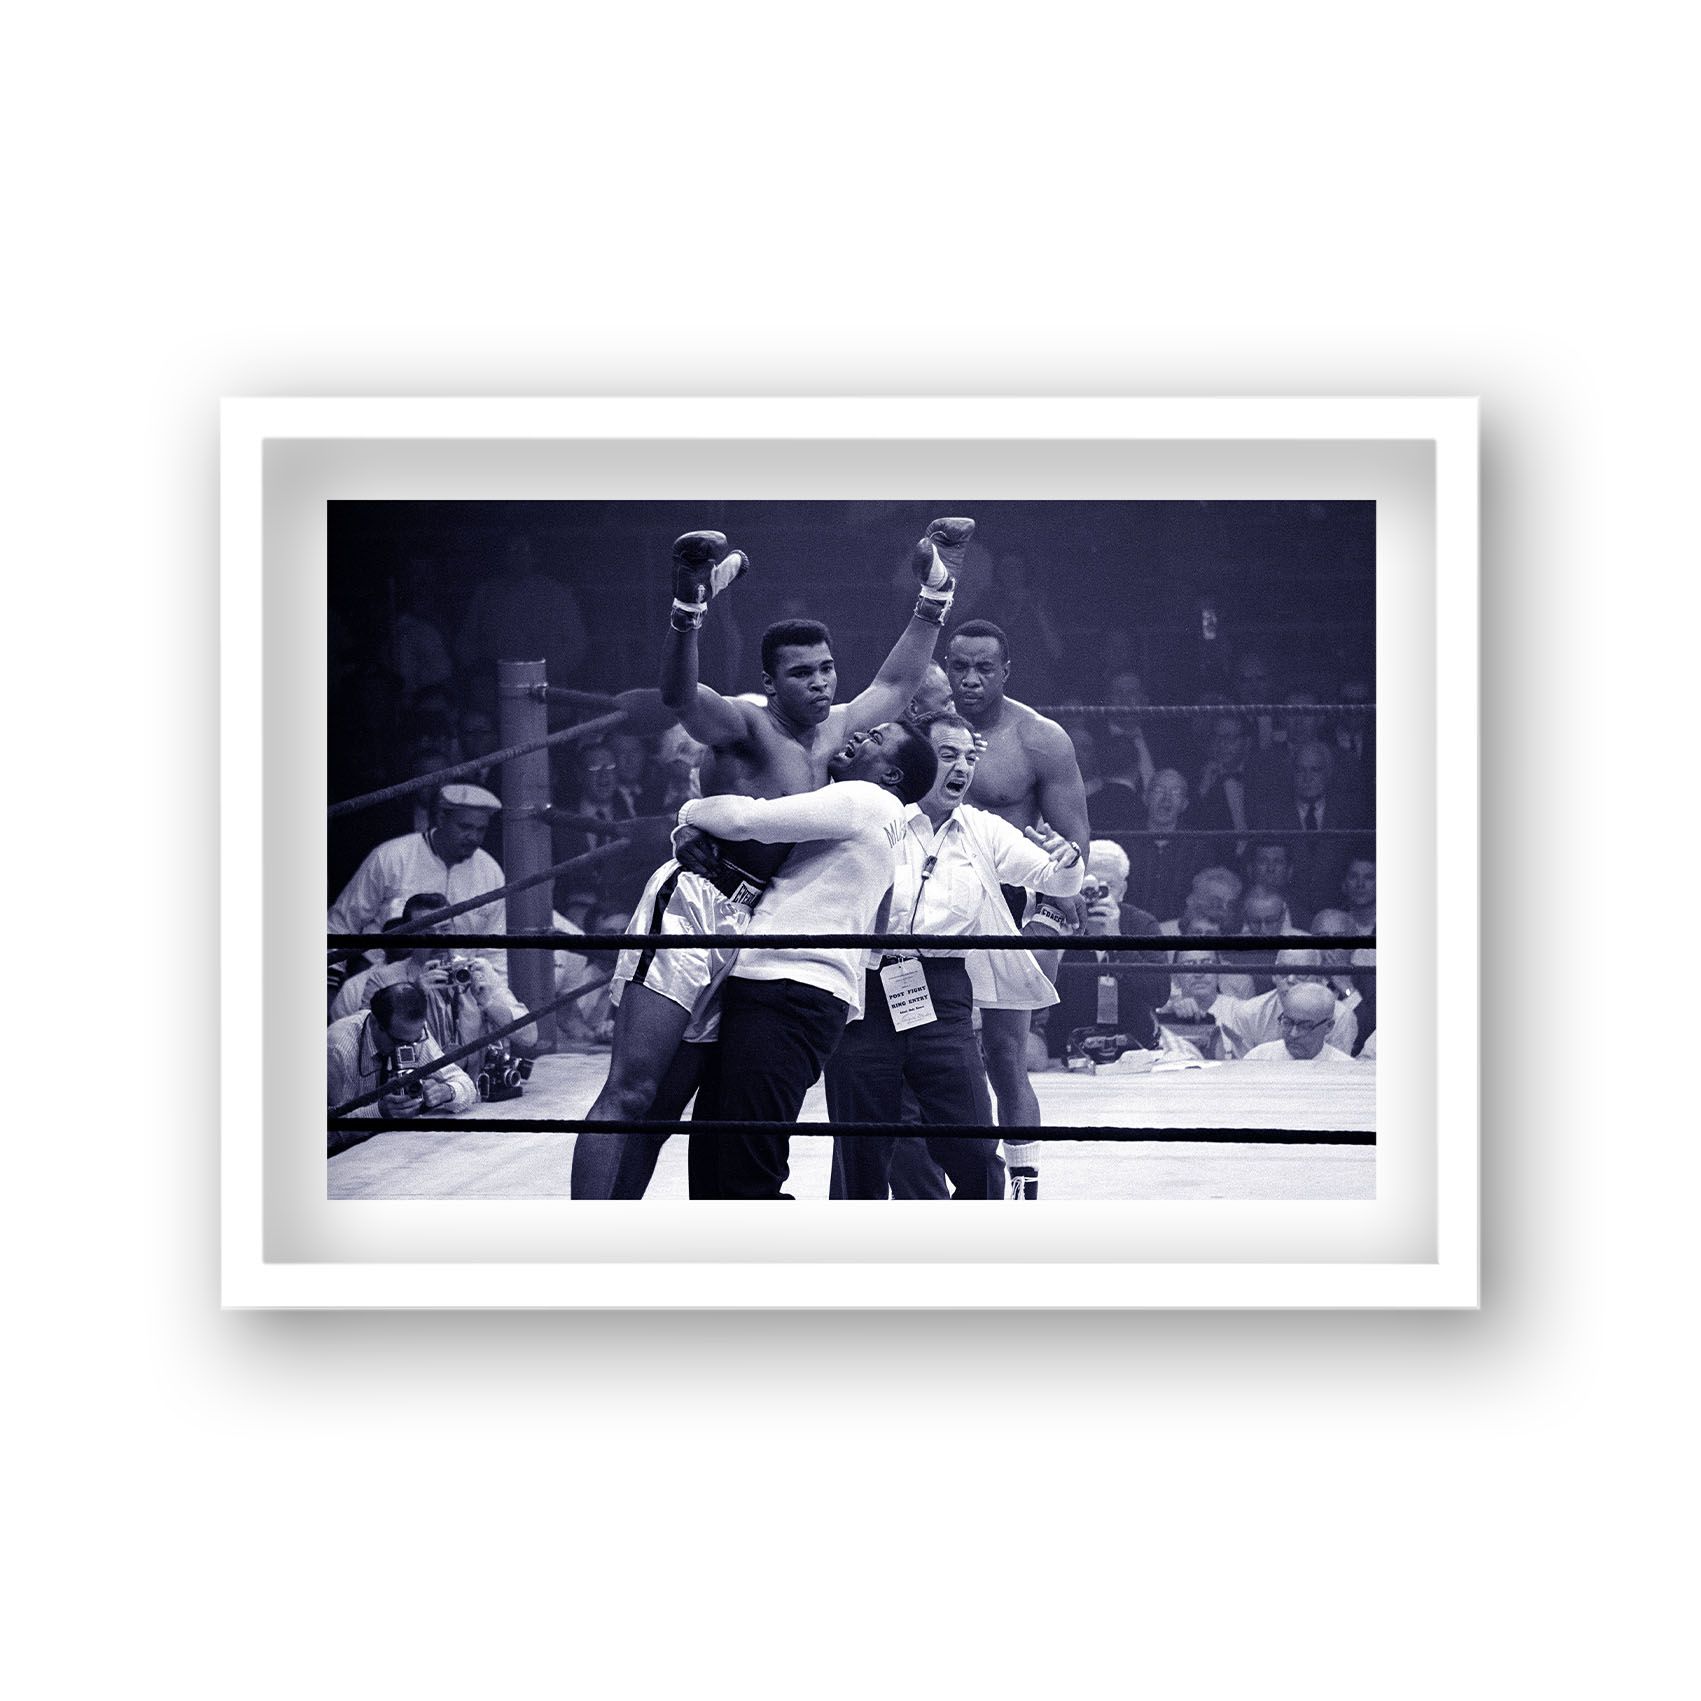 The Victory Shot of Ali's First Round Knockout of Sonny Liston May 1965